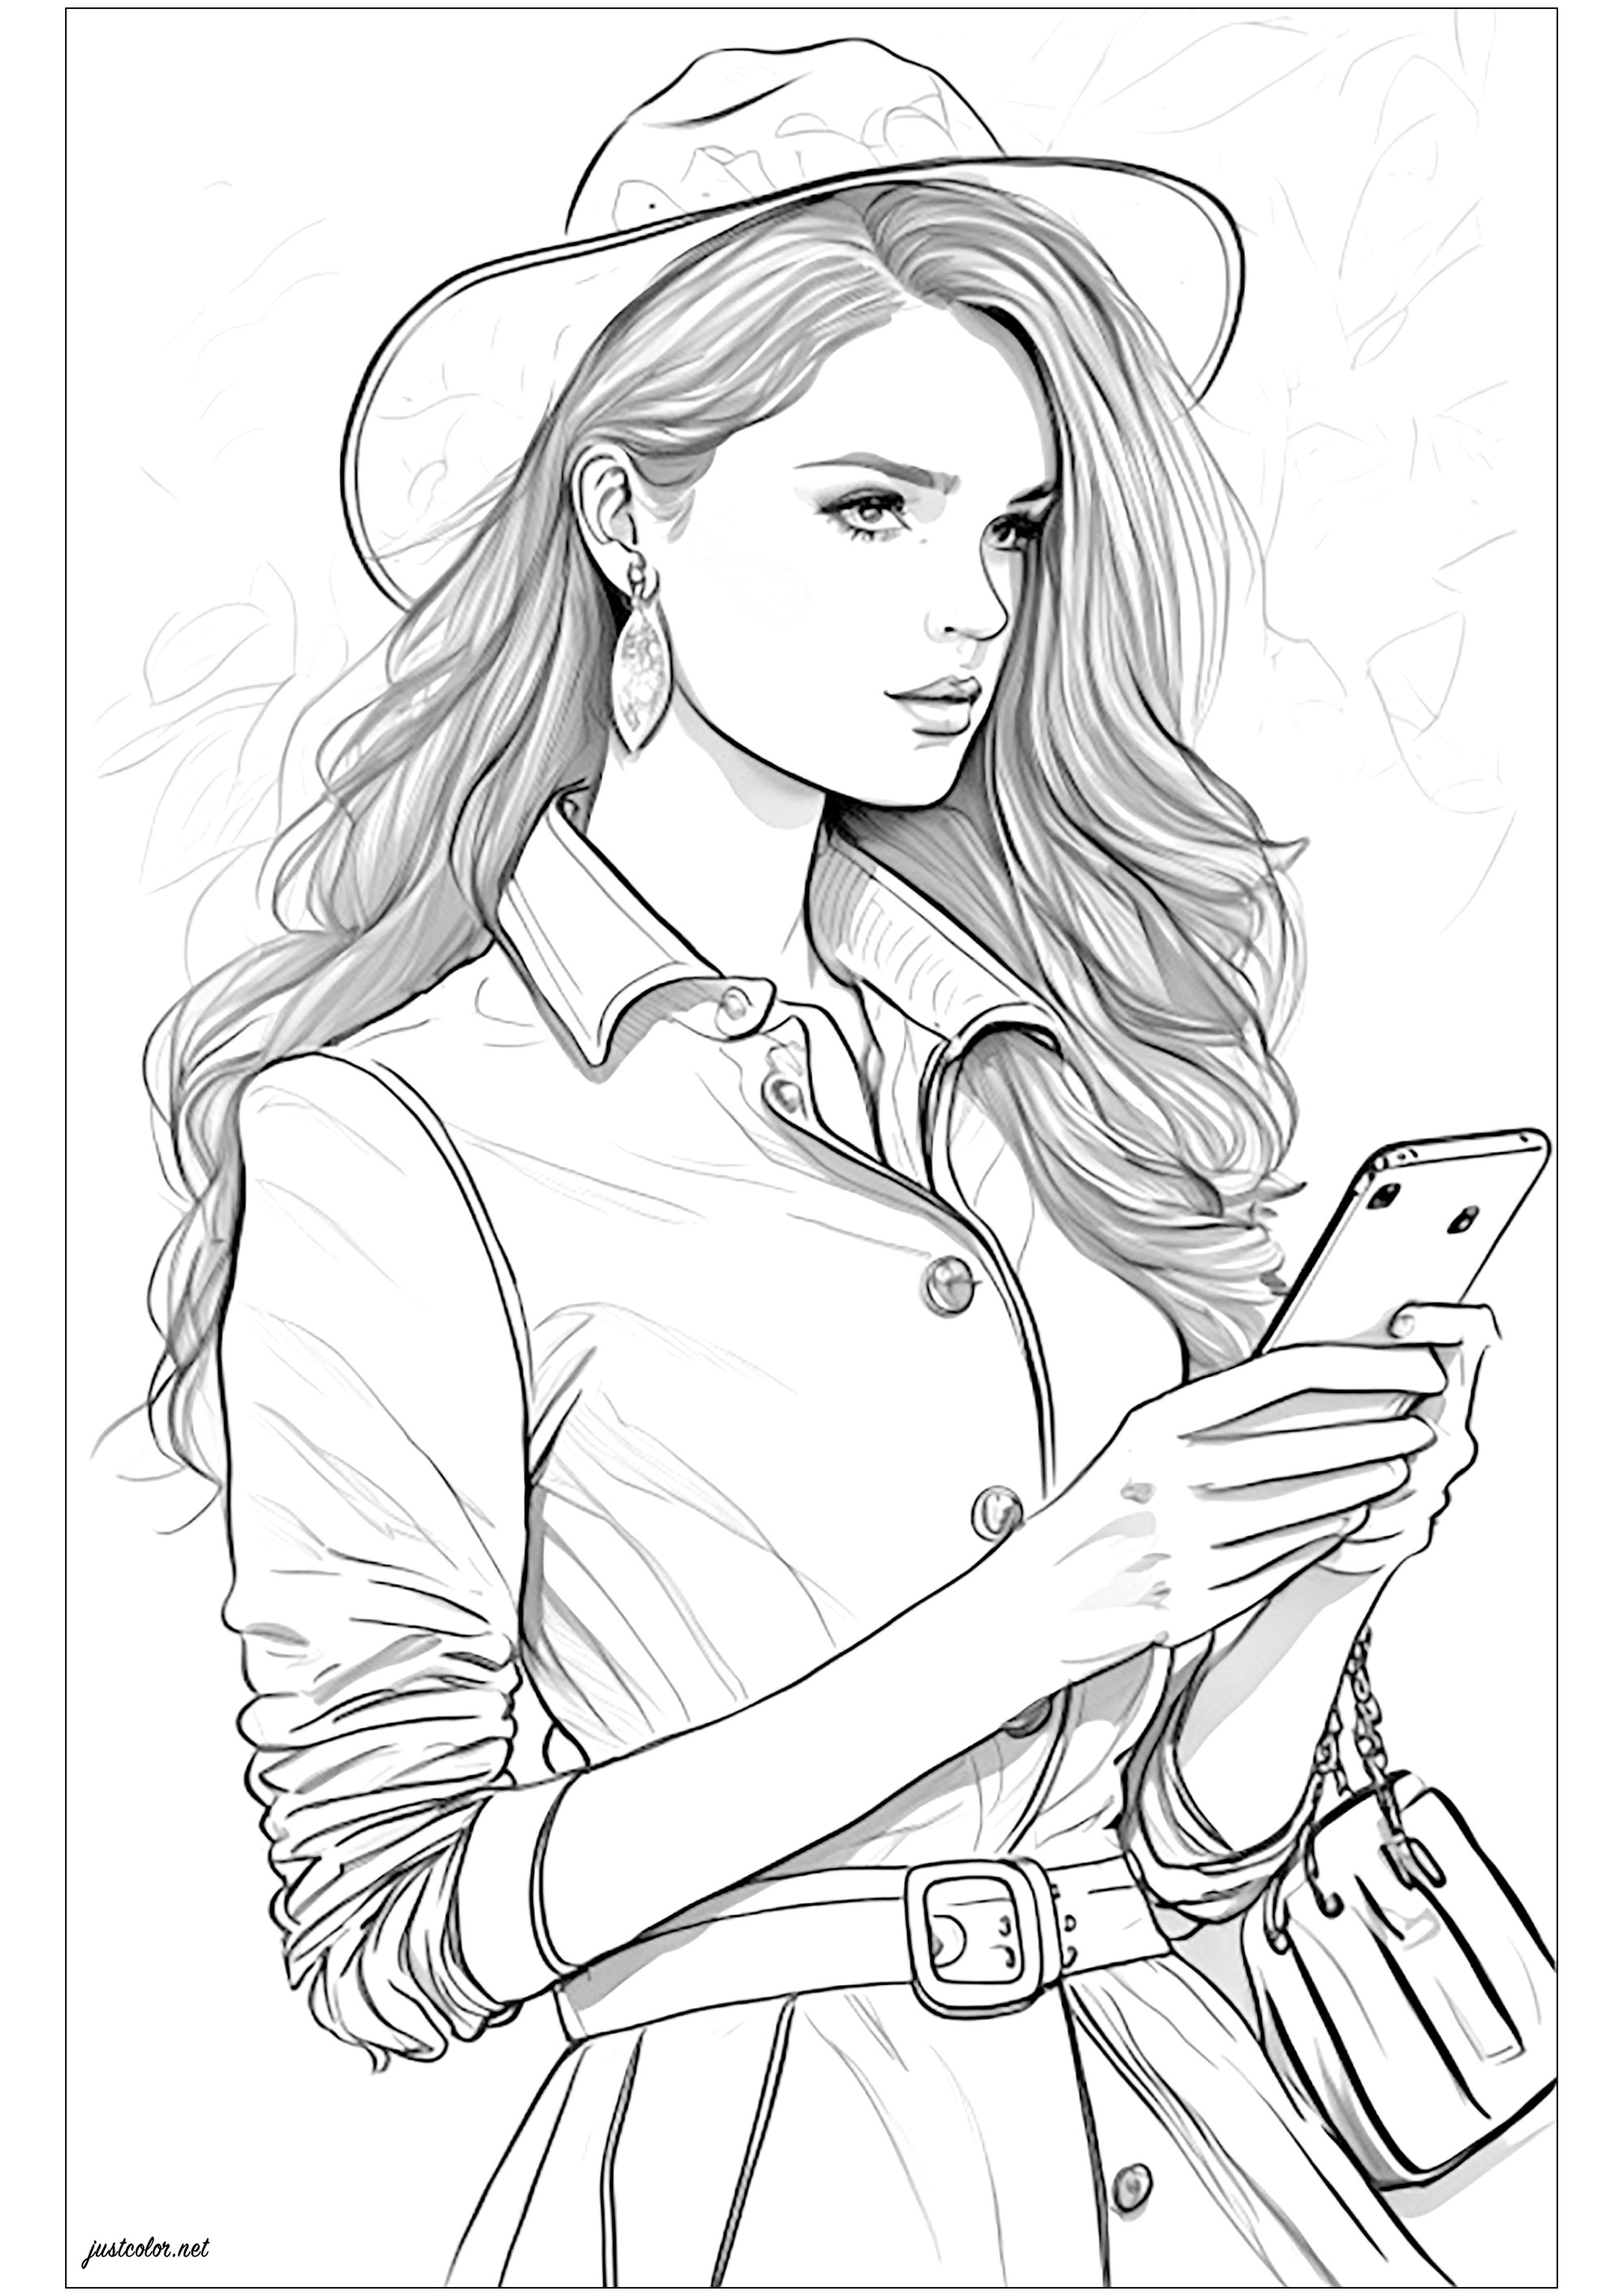 Coloring a young woman using her smartphone. This pretty young woman holding her smartphone in her hands is dressed in a pretty fashionable coat, and walks around with a beautiful handbag. Her hat completes her elegant style. What colors would you choose to embellish her?